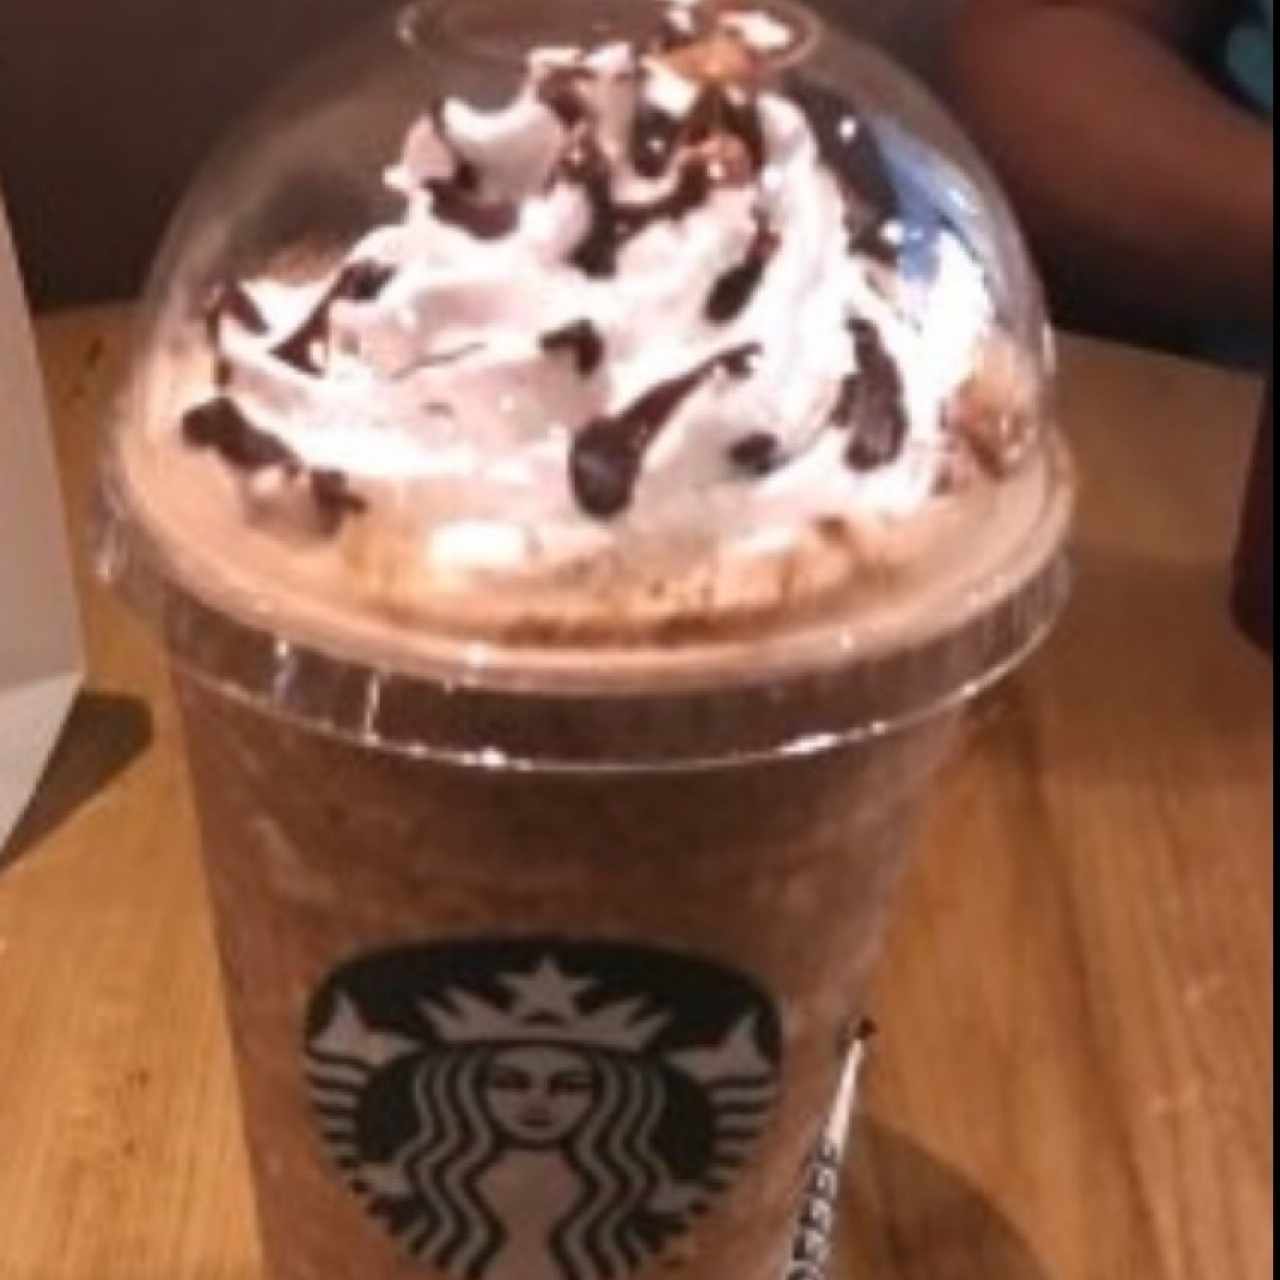 frapuccino chocolate